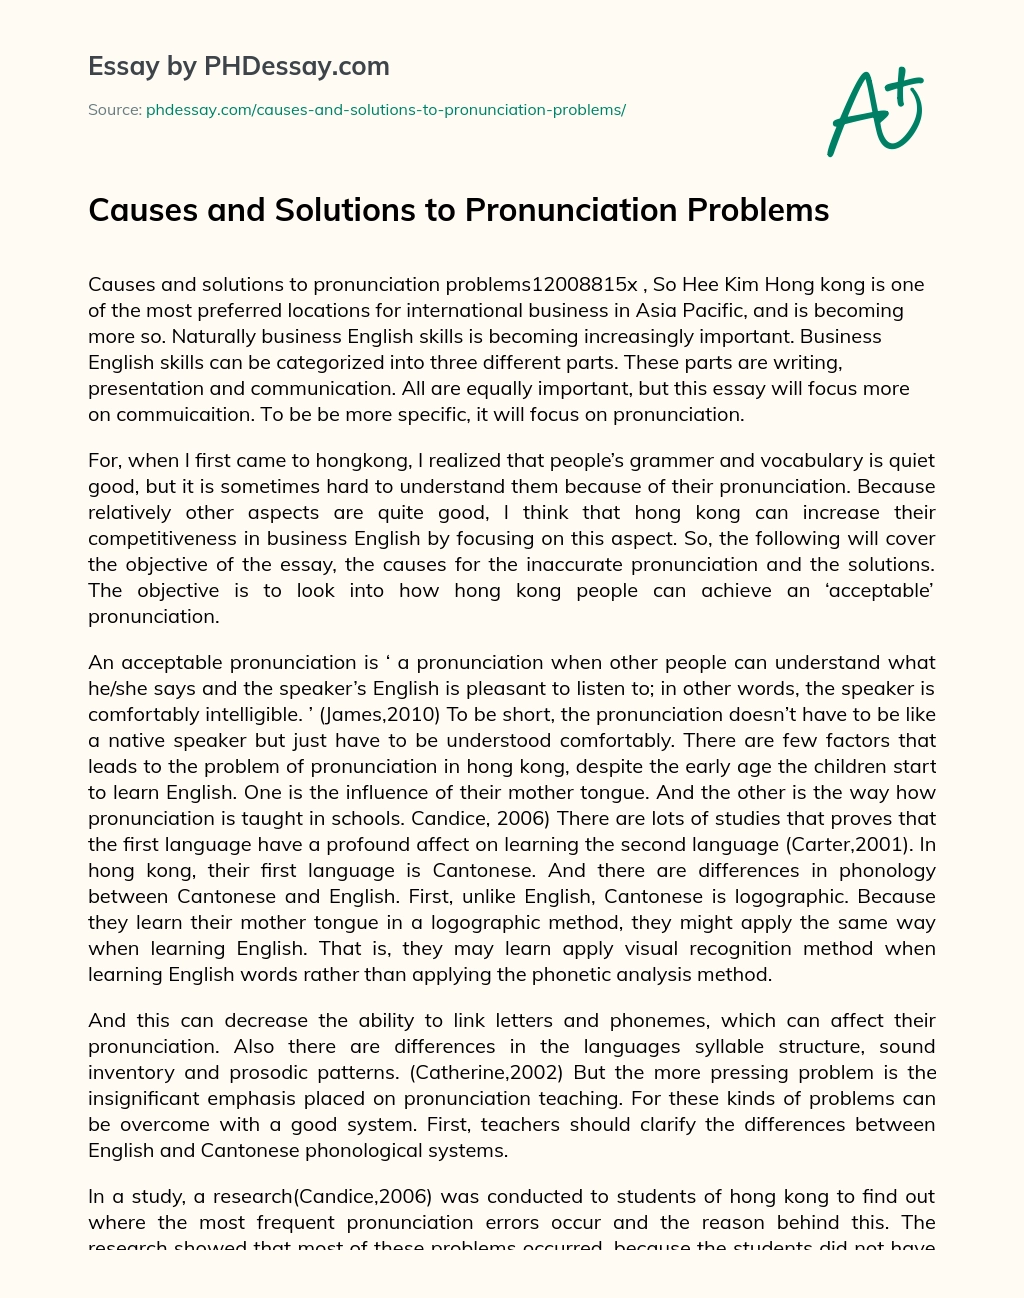 Causes and Solutions to Pronunciation Problems essay